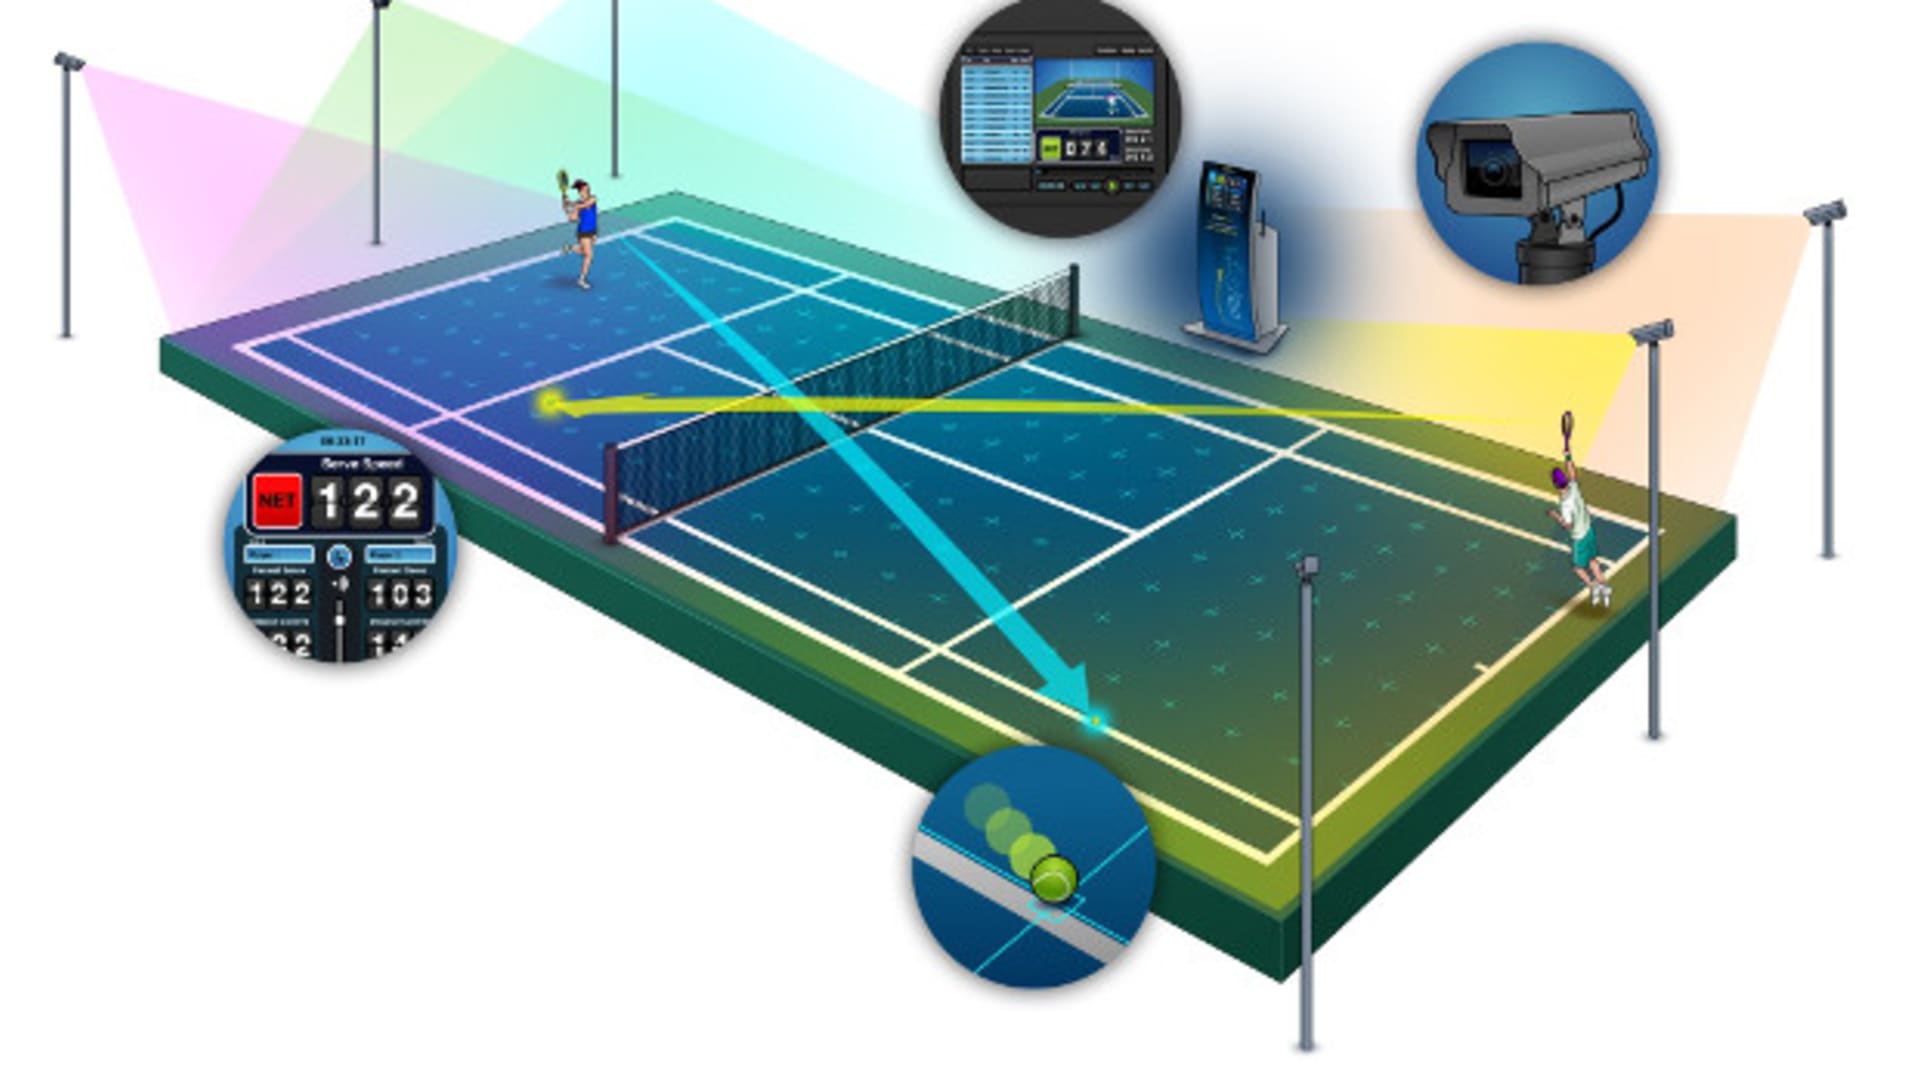 All 102 courts at USTA National Campus to be outfitted with PlaySight technology